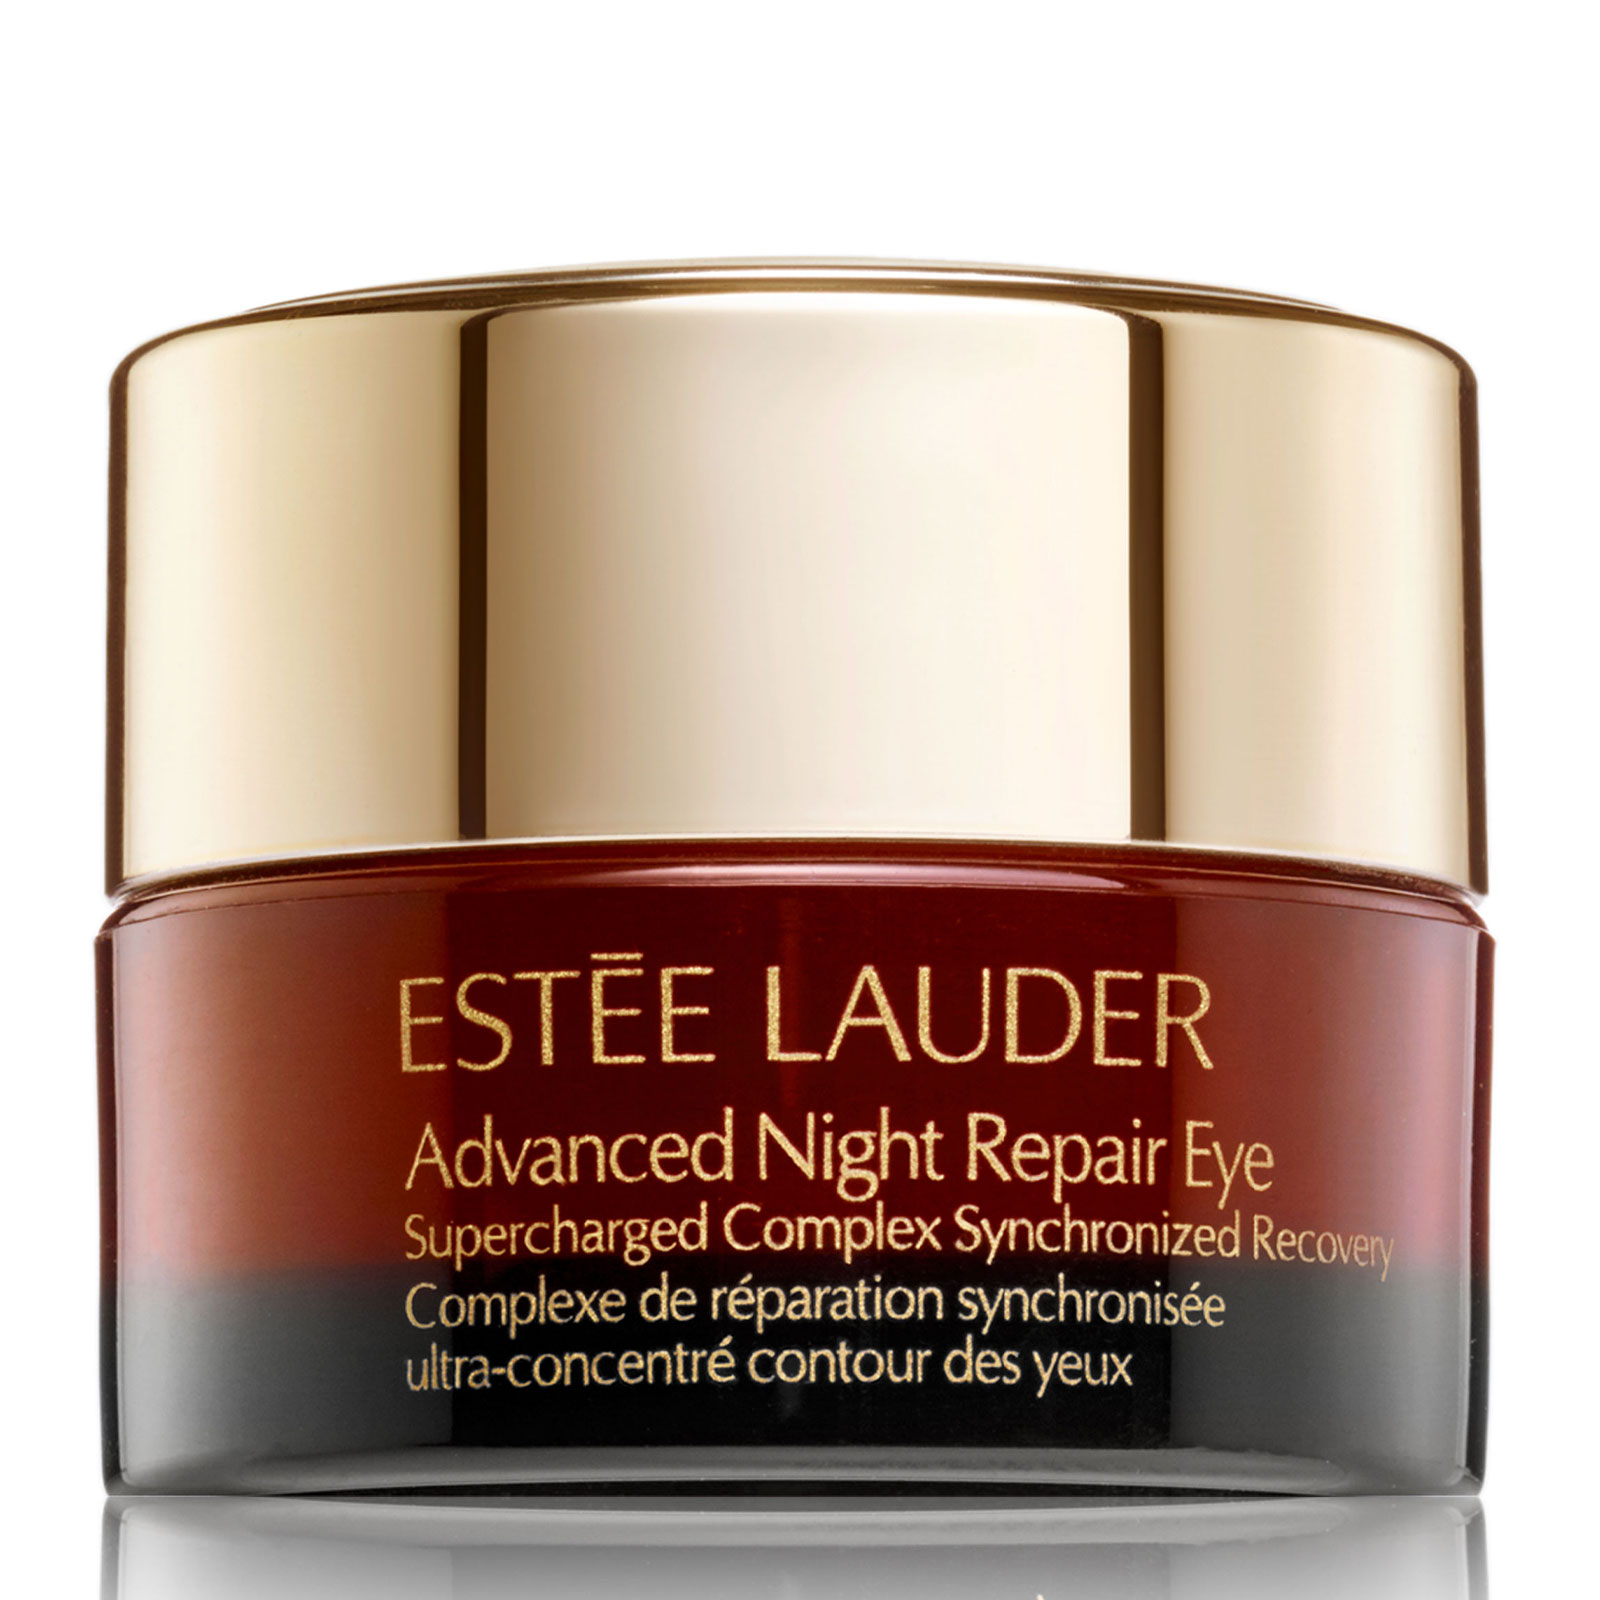 Est&eacute;e Lauder Advanced Night Repair Eye Supercharged Complex Synchronized Recovery 30ml